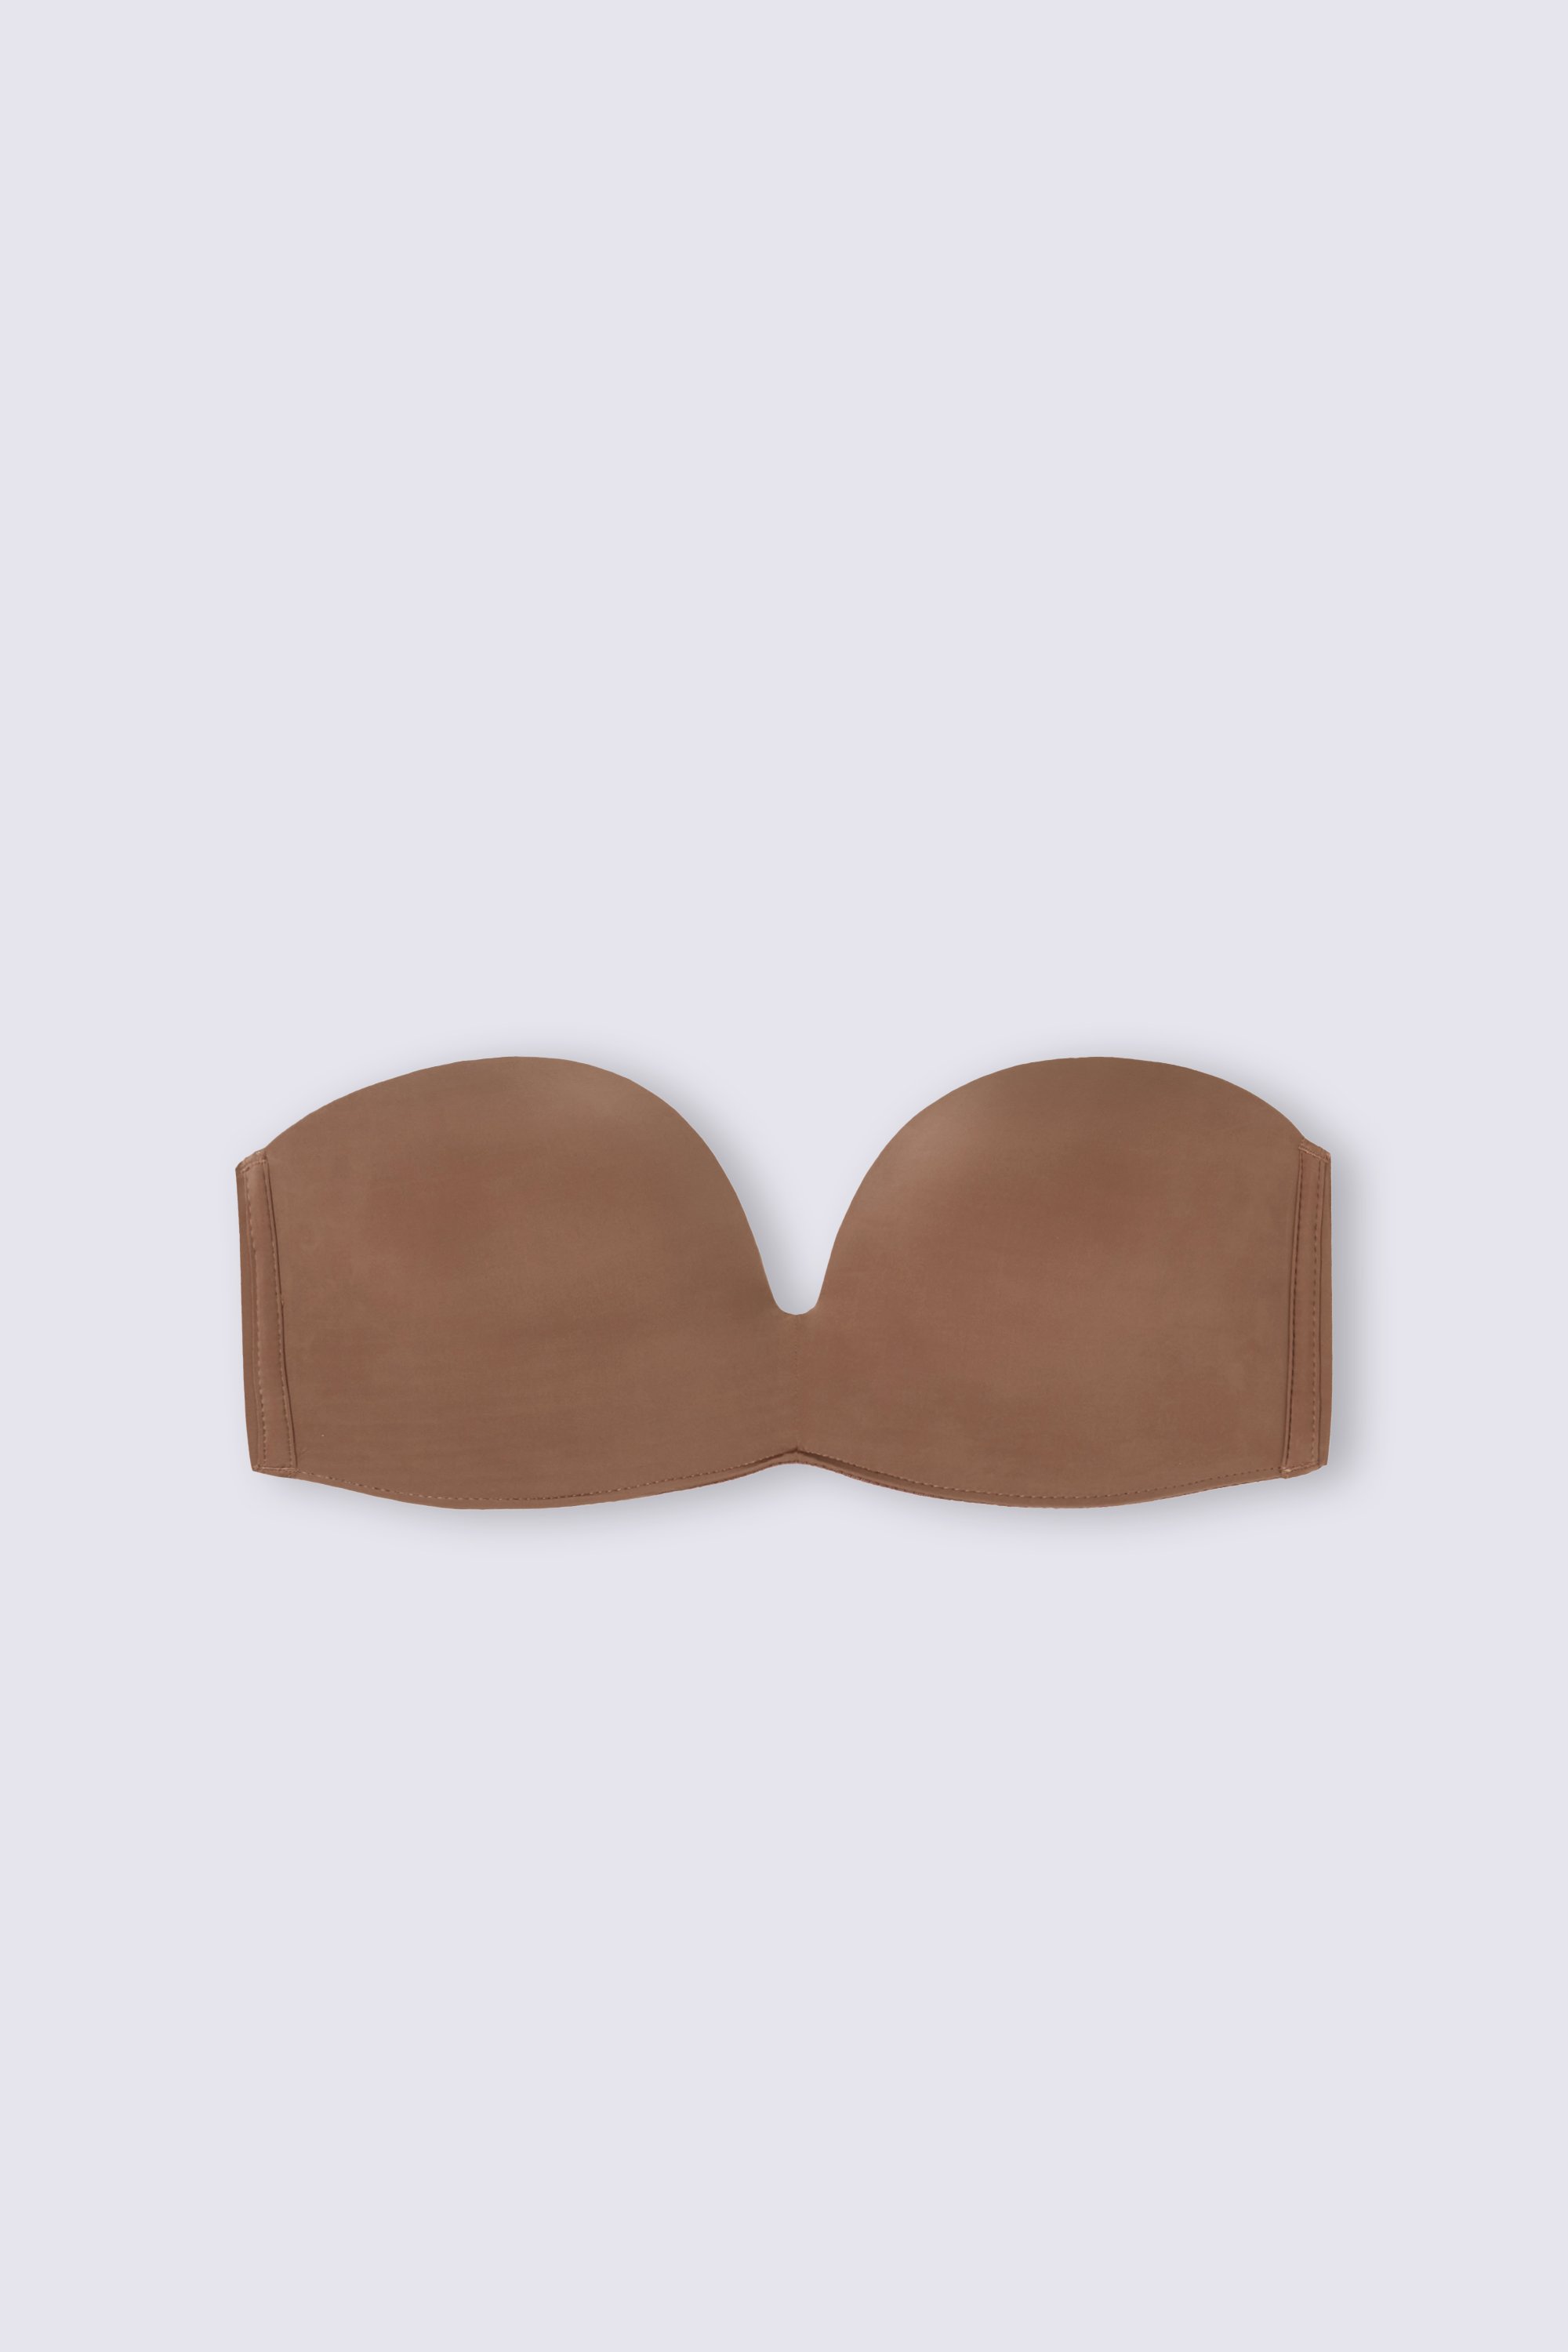 Strapless Bra with Graduated Padding and Plunge Front - Intimissimi